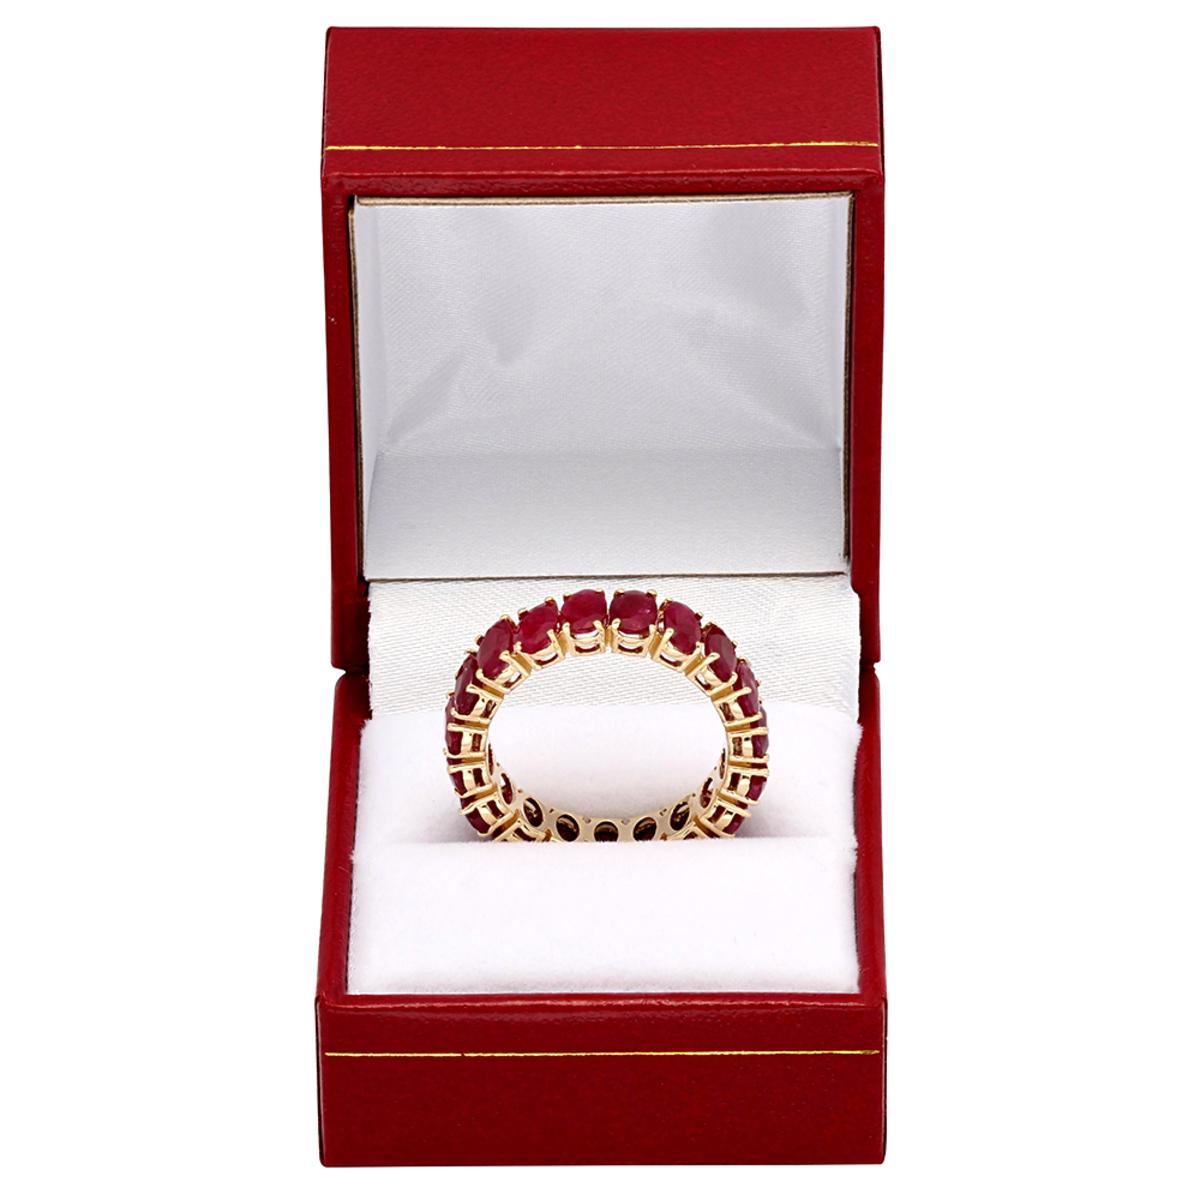 14k Yellow Gold 10.47ct Ruby Eternity Band Ring